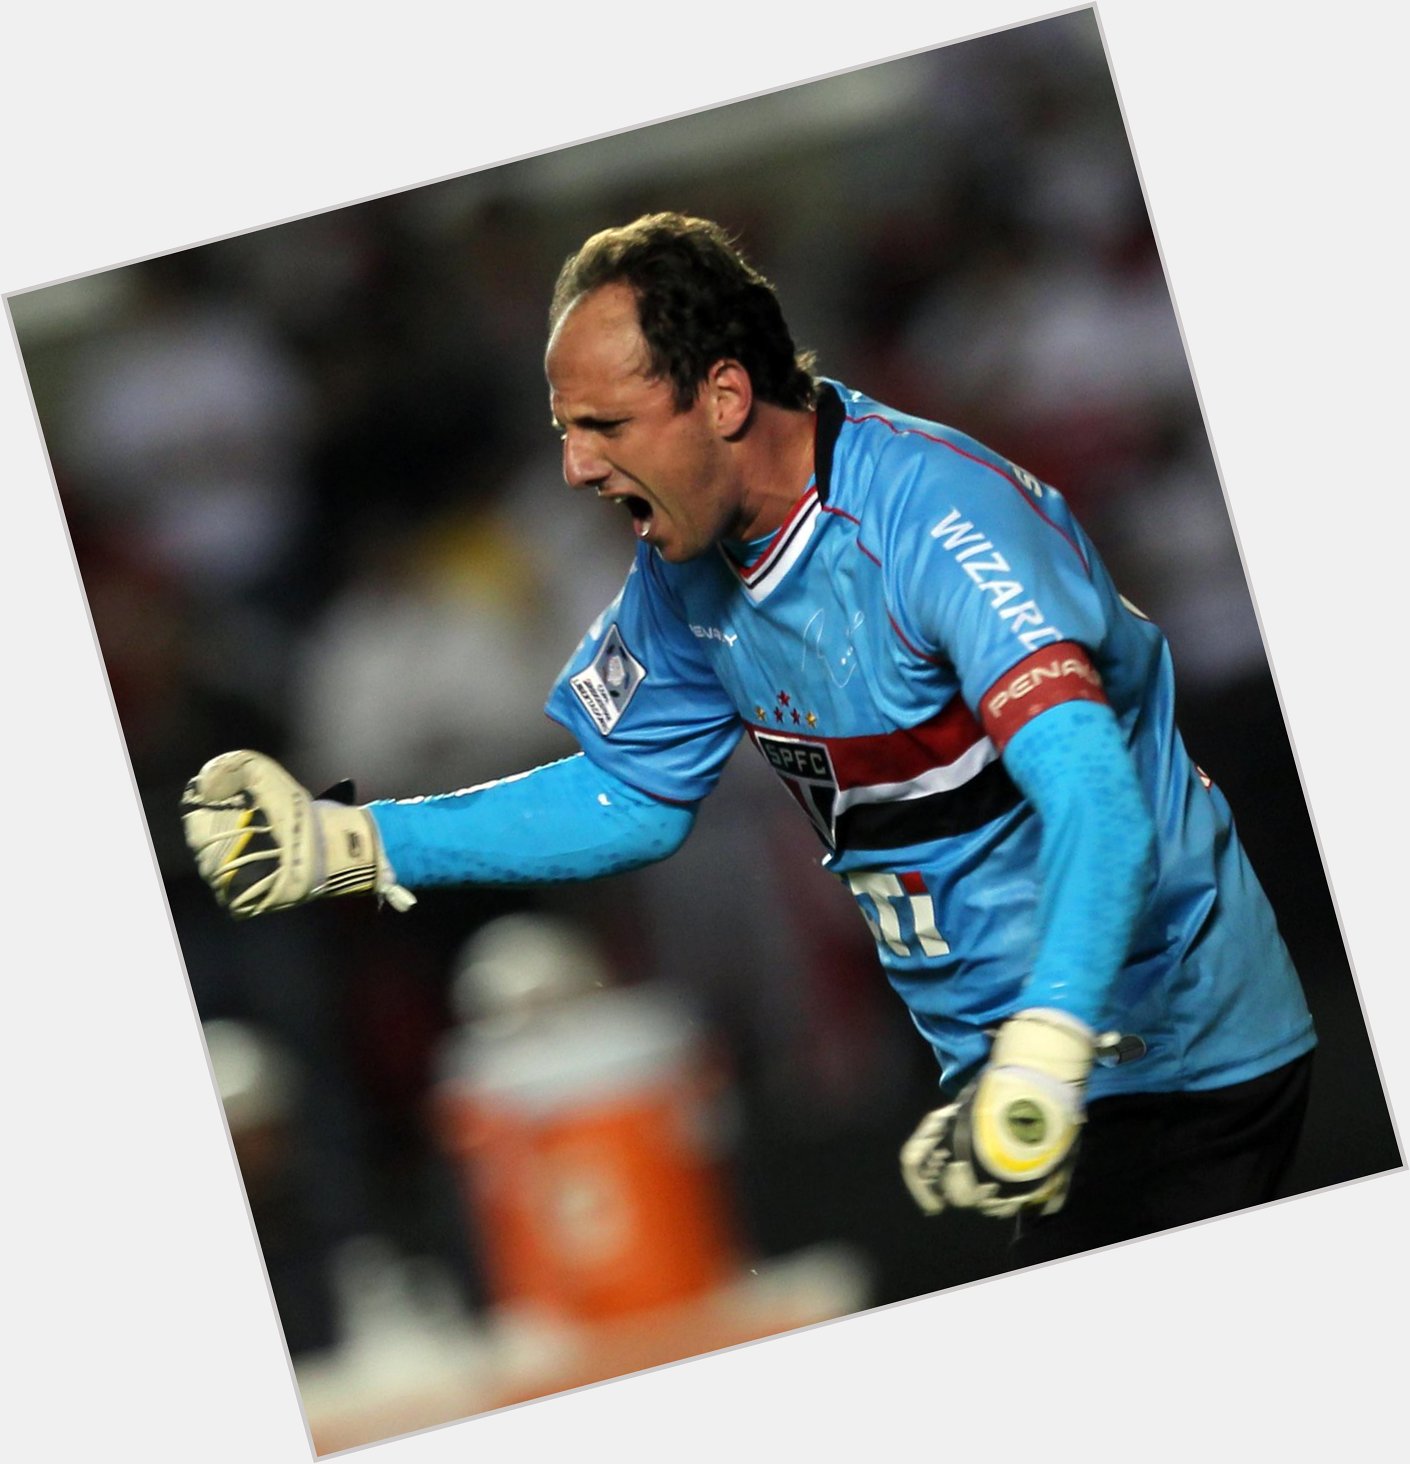 Happy 42nd birthday to Rogerio Ceni. No goalkeeper in the history of the game has scored more goals than him (123). 